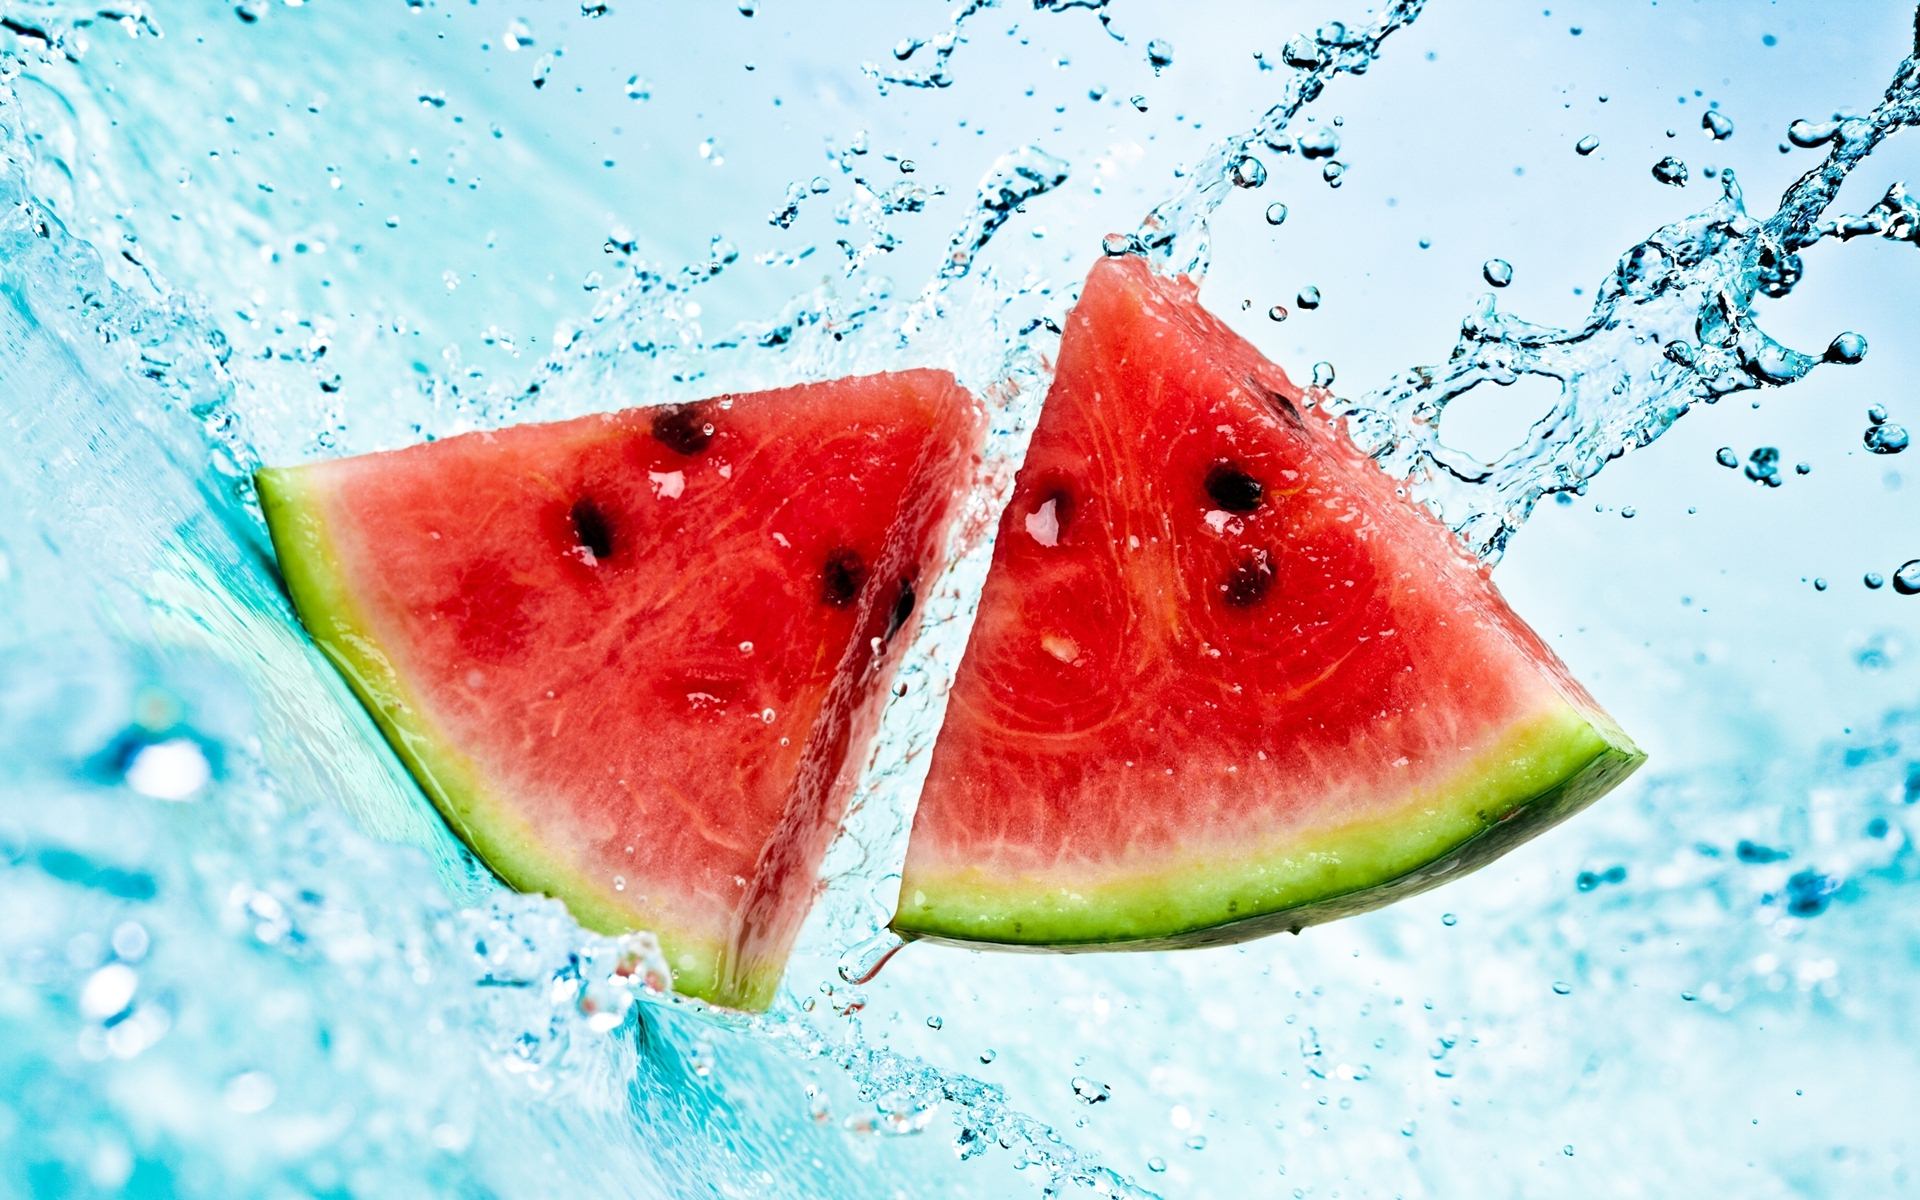 Watermelon High Quality Wallpapers 